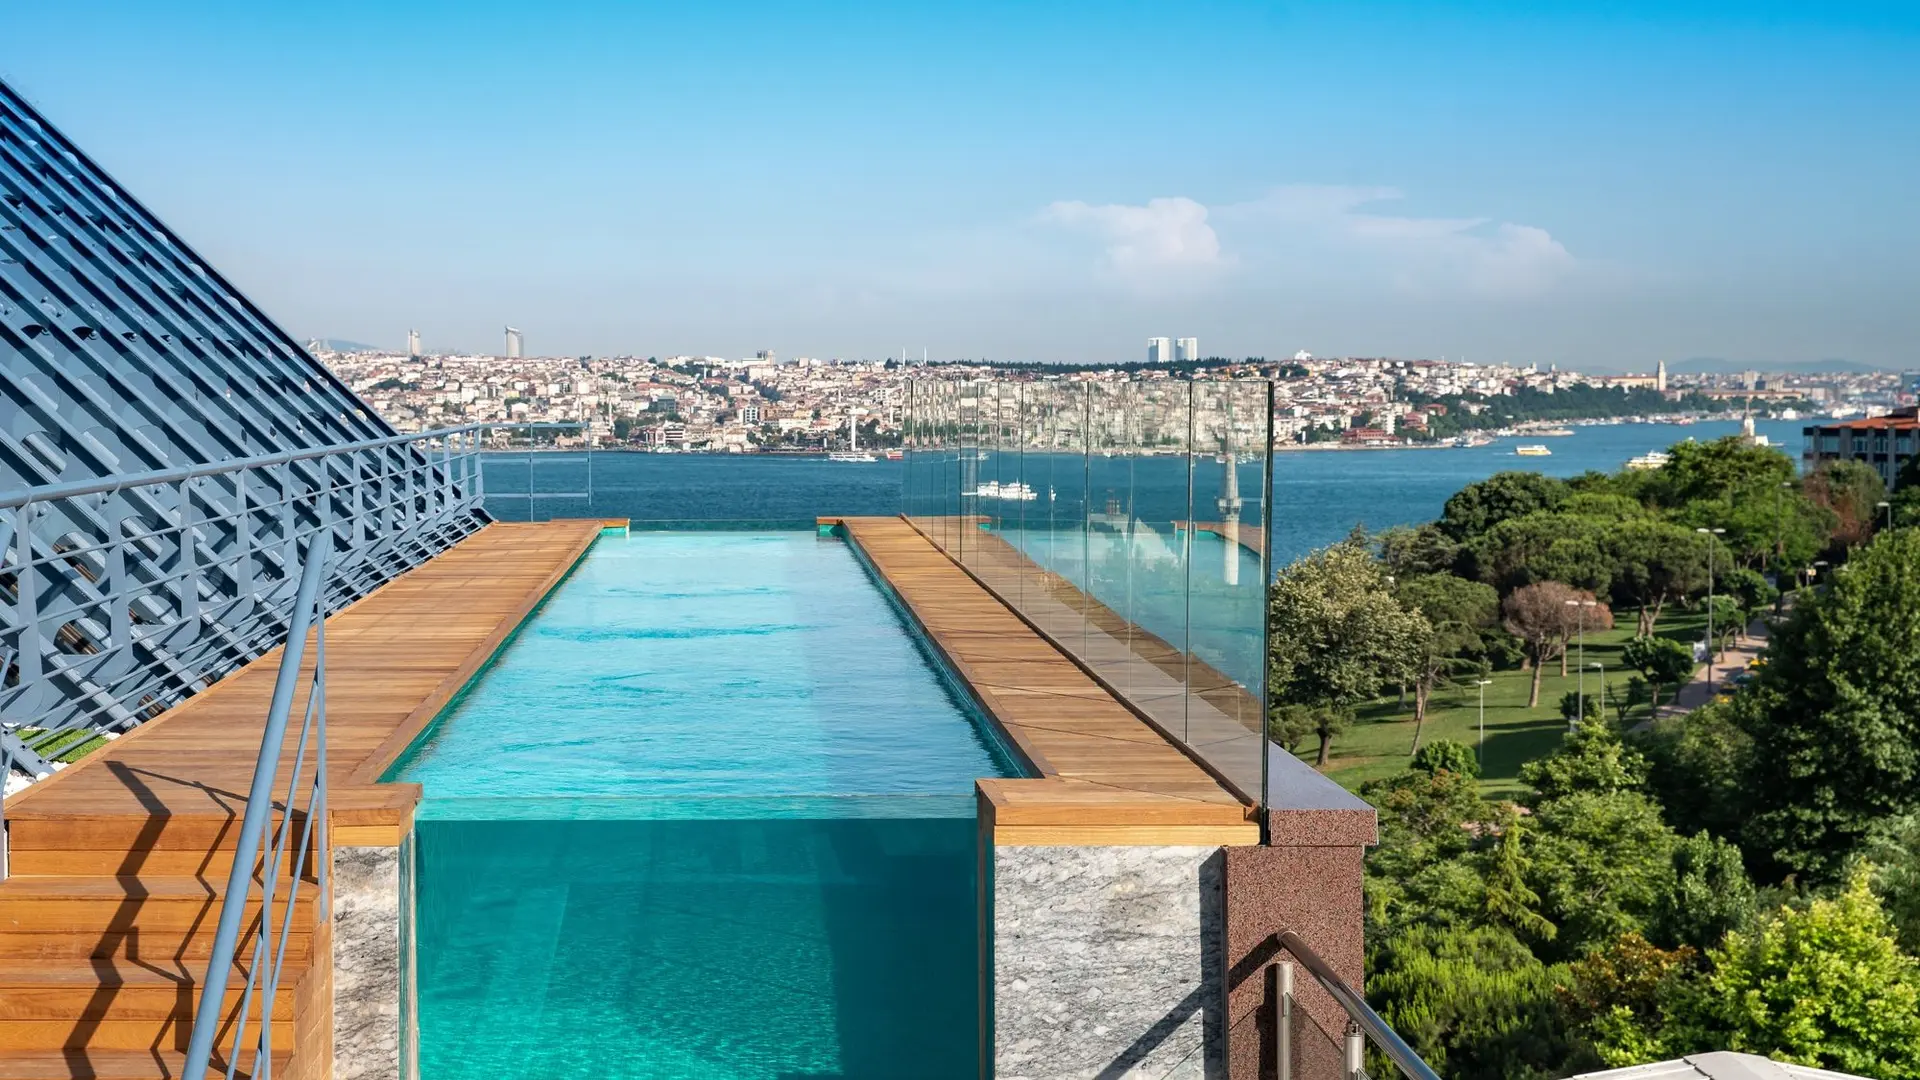 Infinity pool with Turkish-inspired style at the The Luxurious Ritz-Carlton, Istanbul.